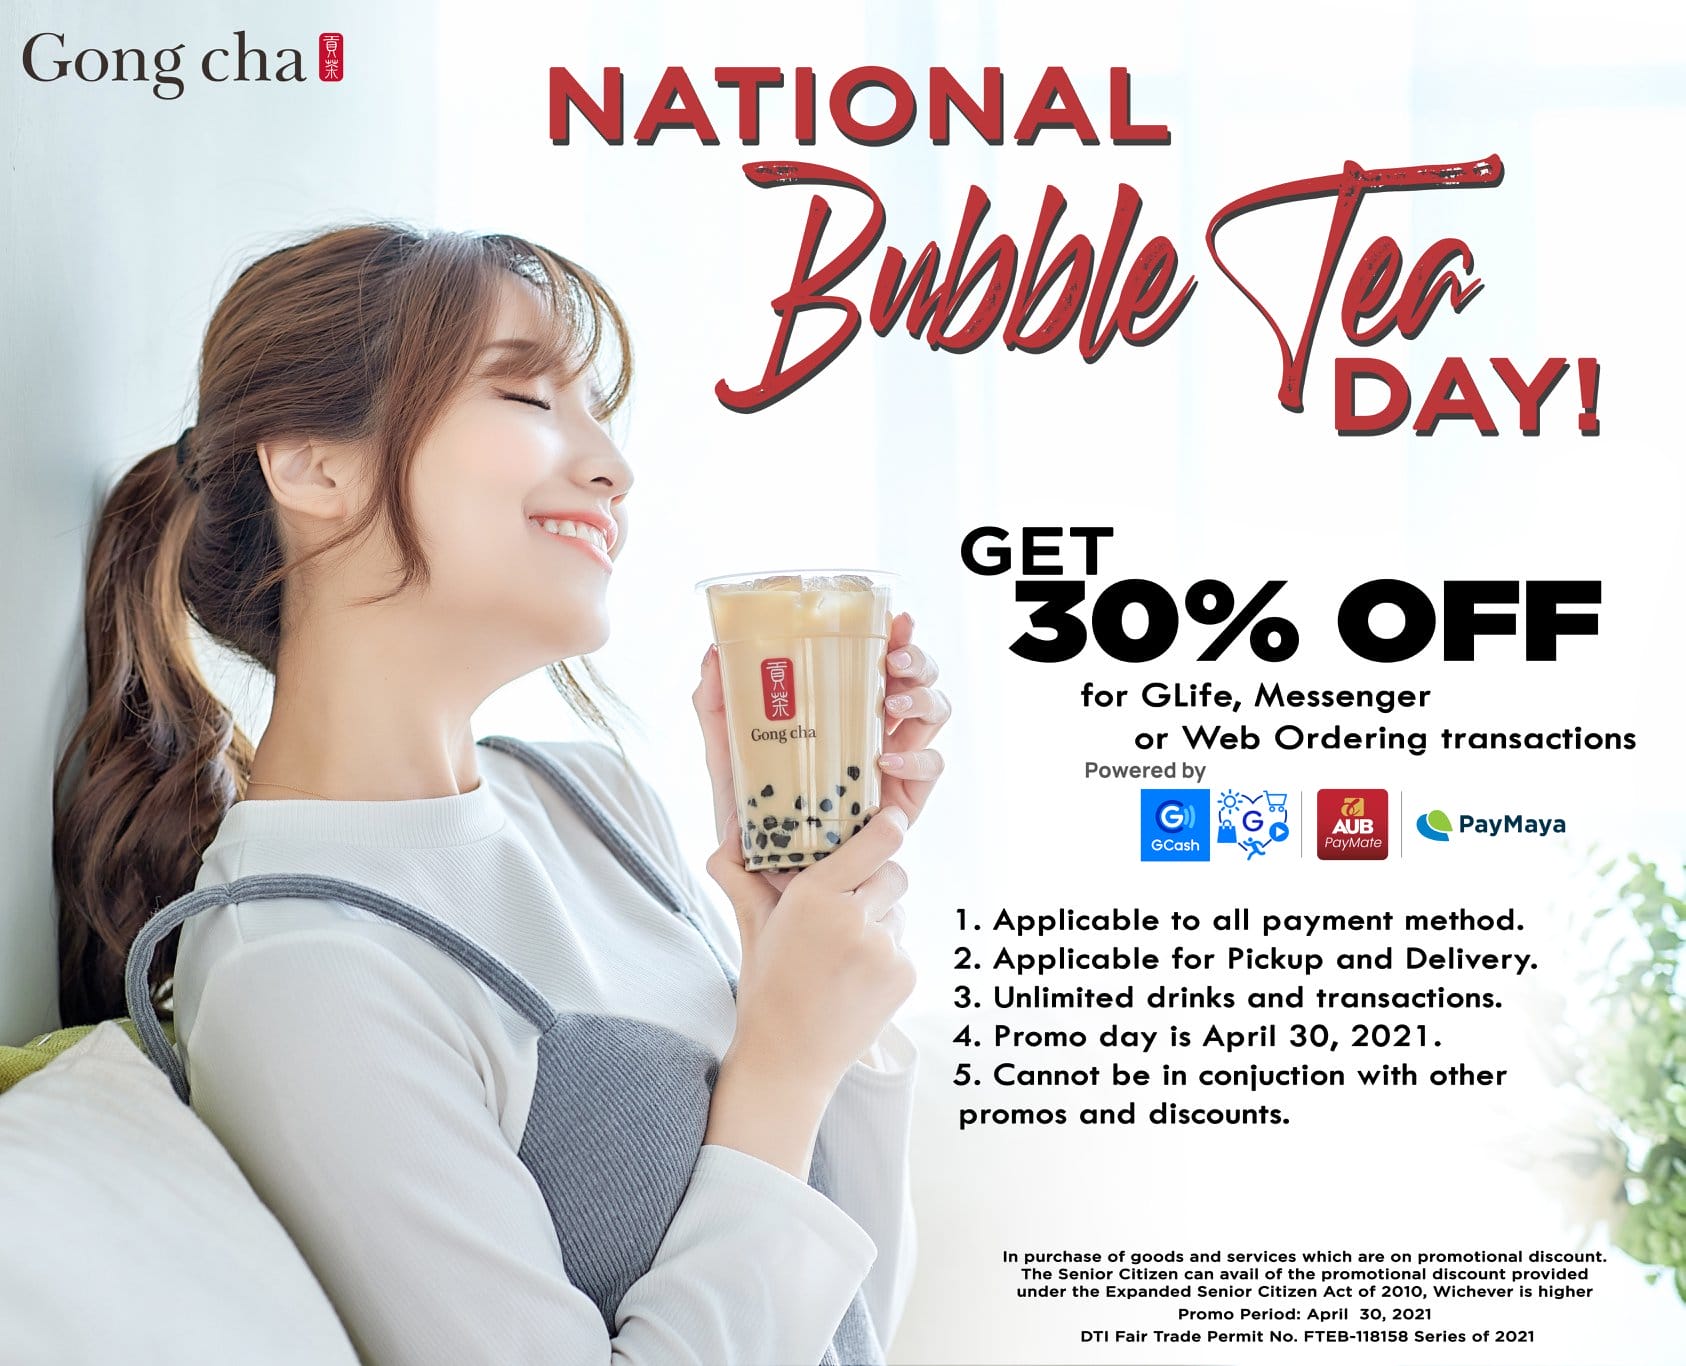 Gong cha National Bubble Tea Day Promo Get 30 Off Deals Pinoy